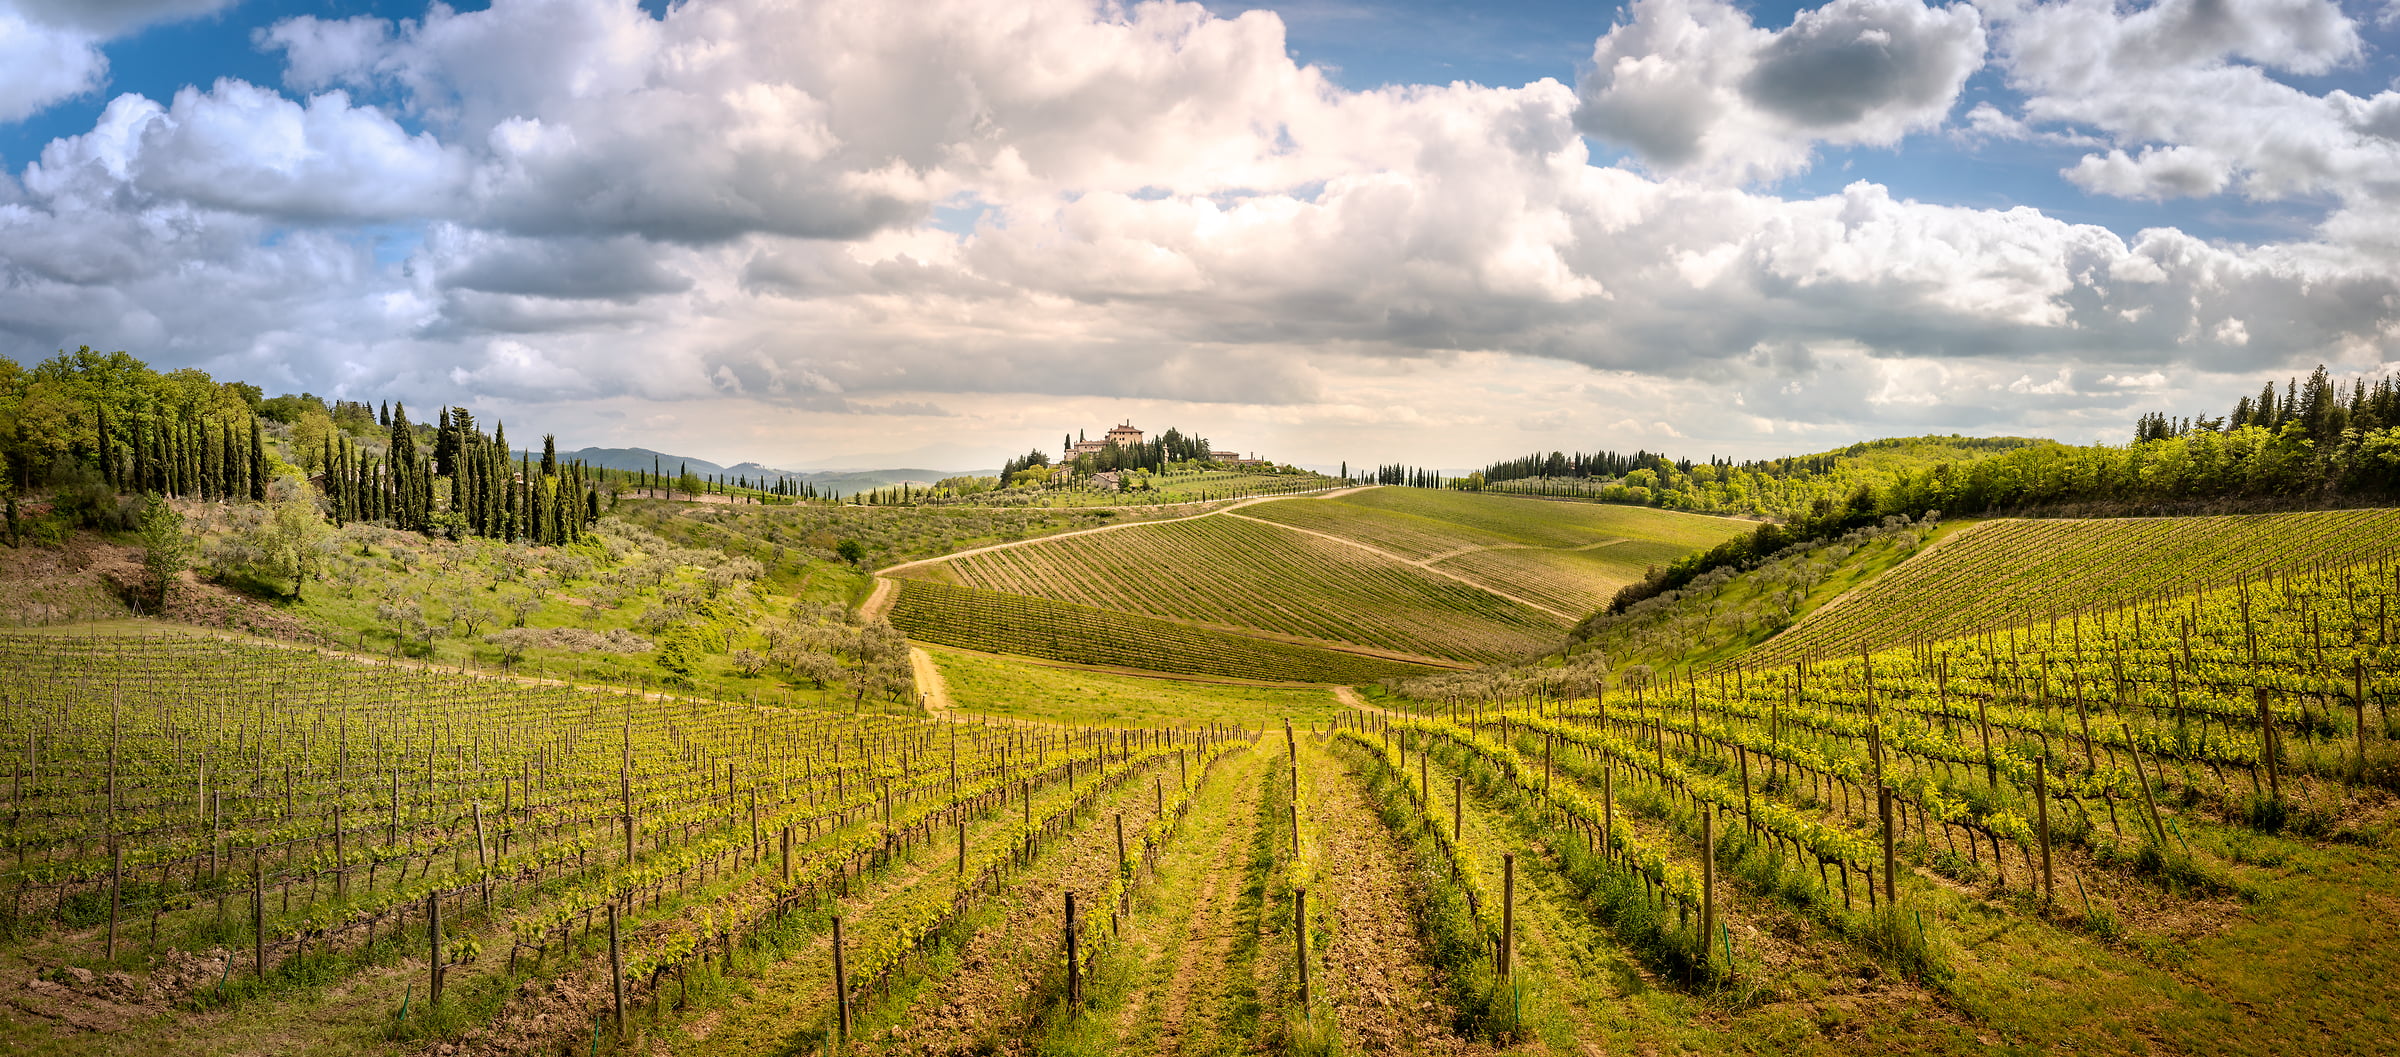 427 megapixels! A very high resolution, large-format VAST photo print of vinyards in Tuscany; photograph created by Justin Katz in Radda in Chianti, Tuscany, Italy